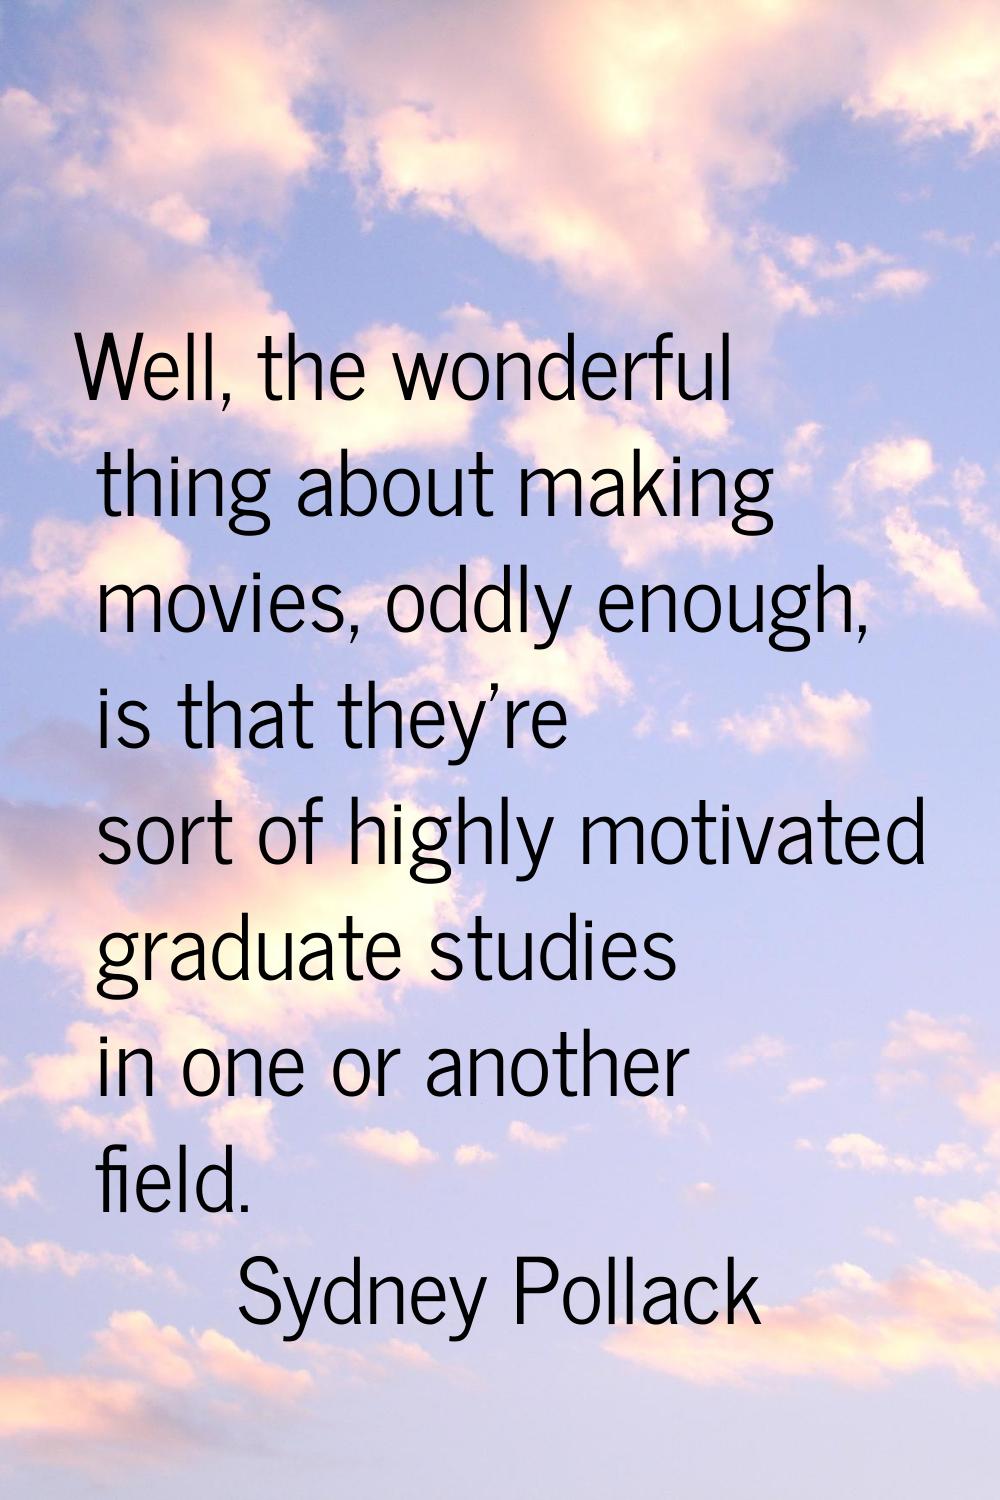 Well, the wonderful thing about making movies, oddly enough, is that they're sort of highly motivat